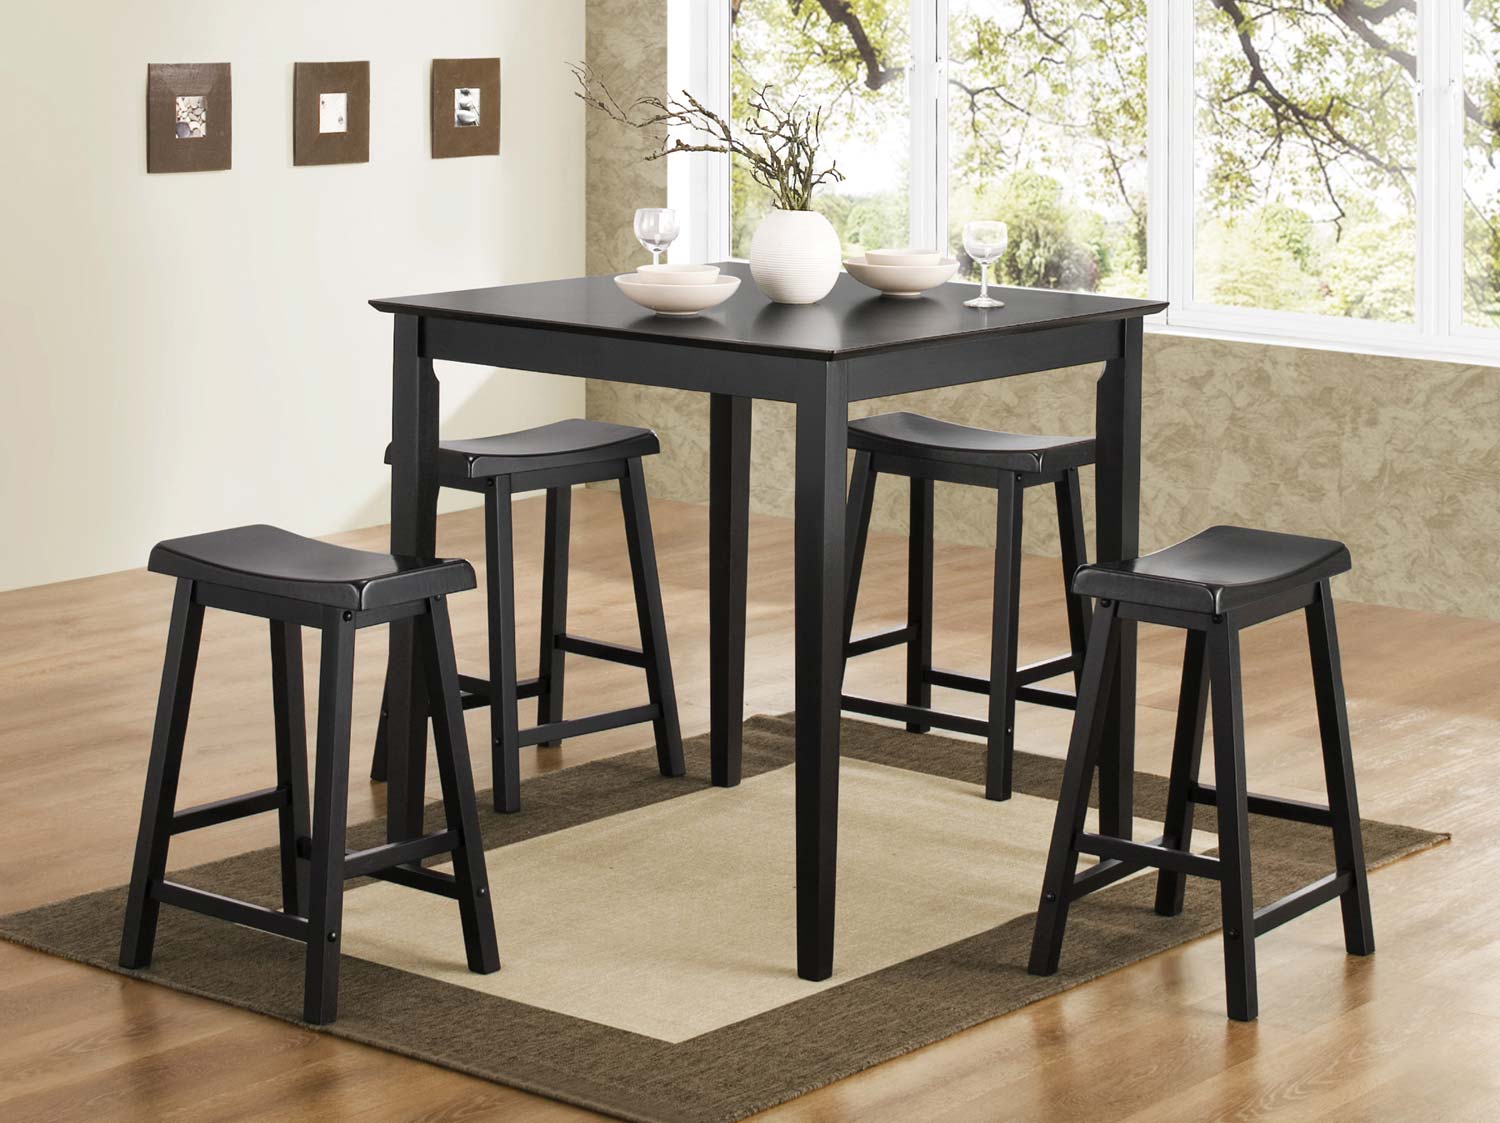 Coaster 150291N 5PC Counter Height Dining Set - Black